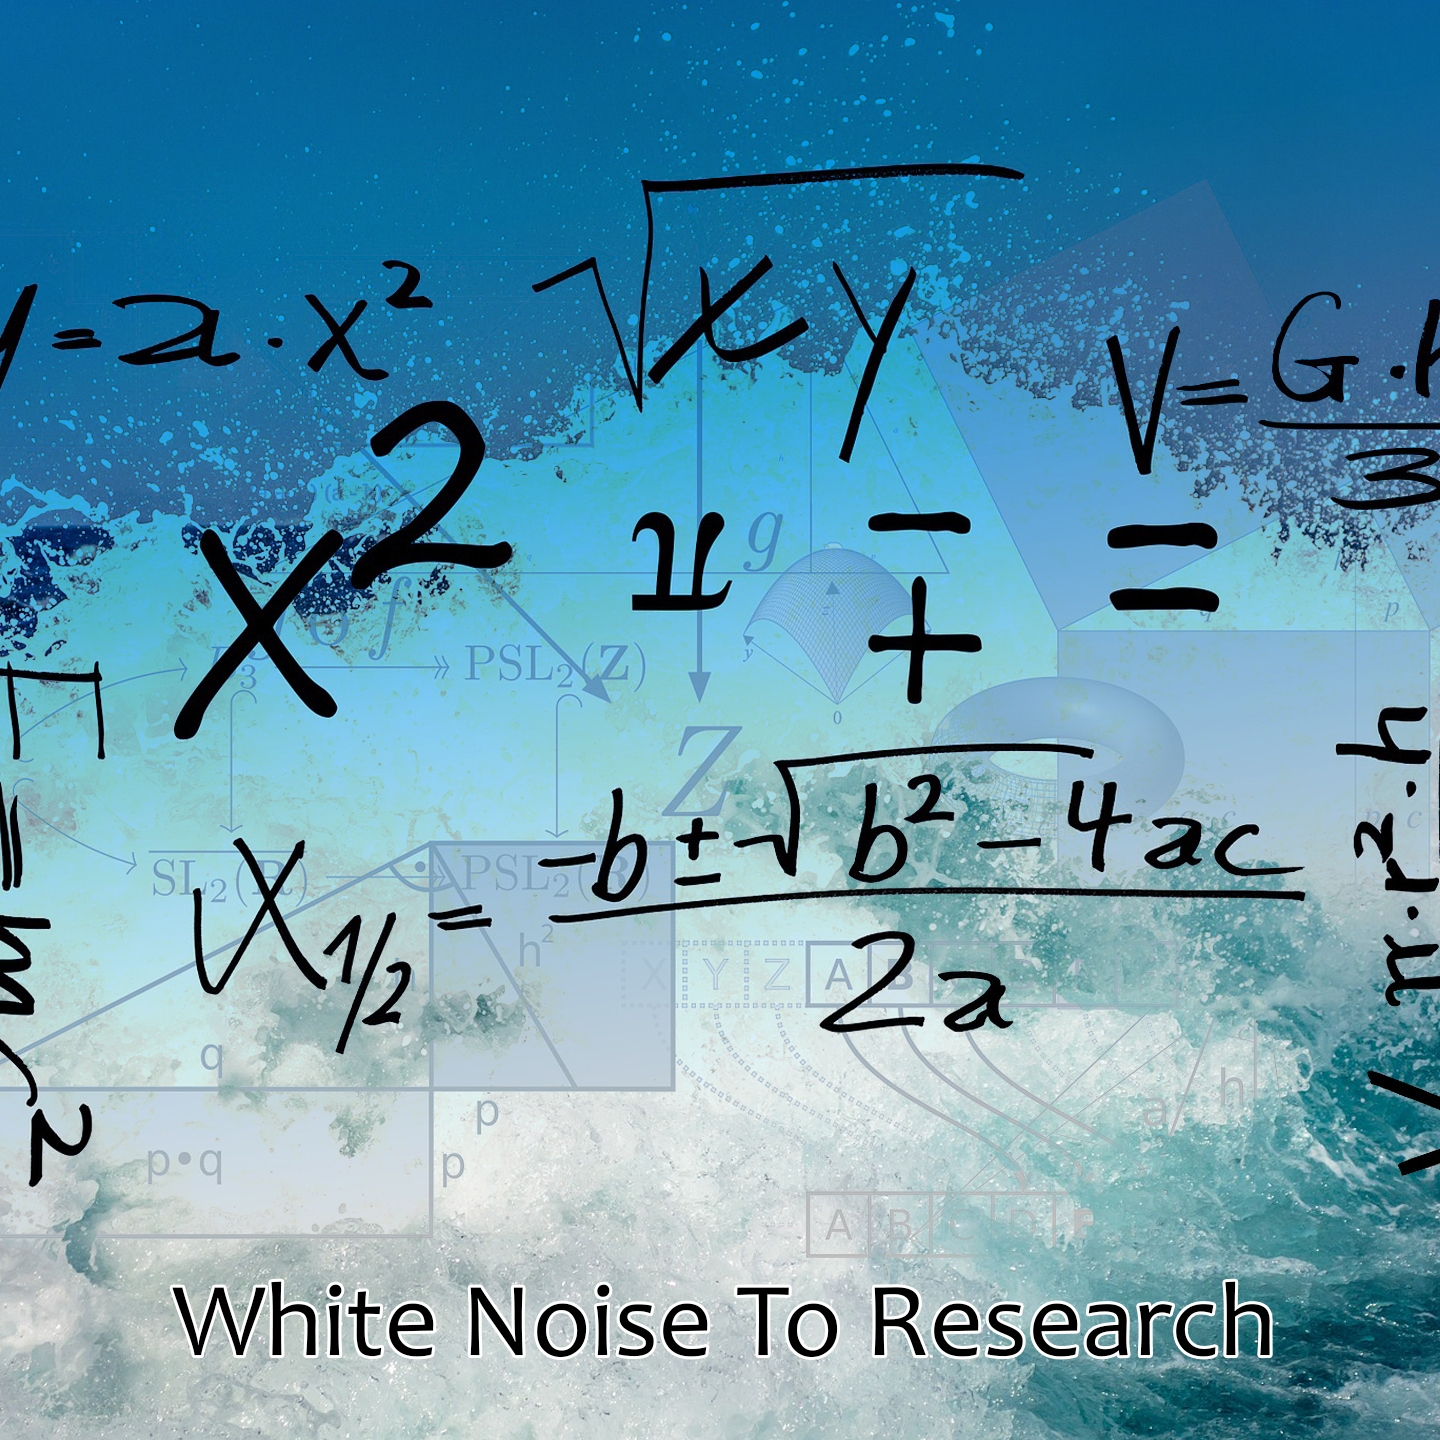 White Noise To Research